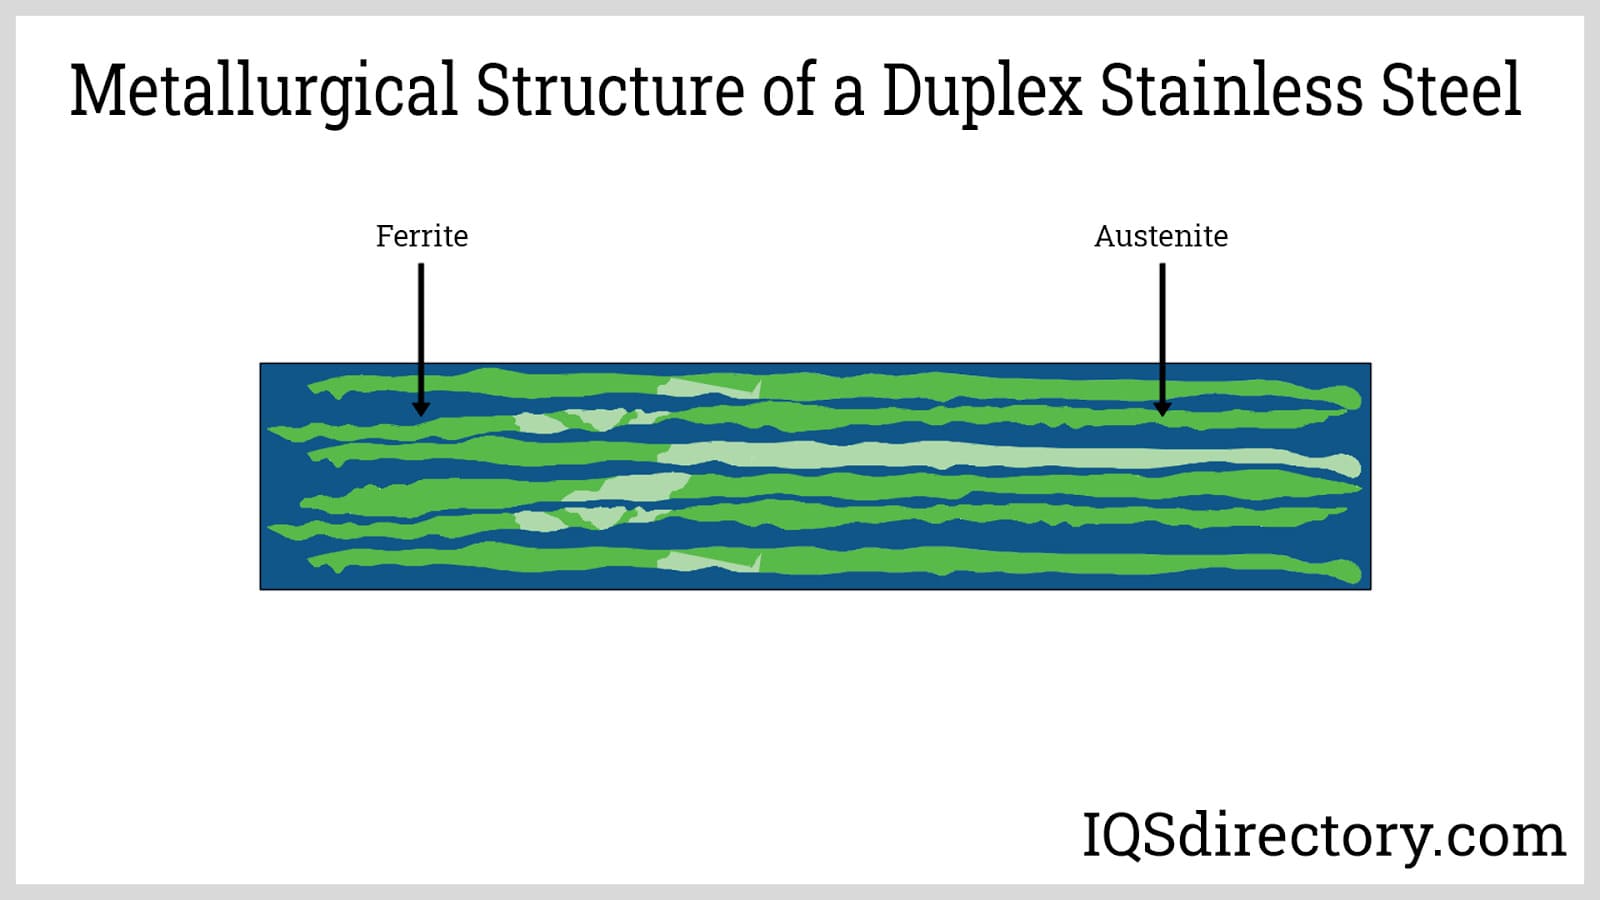 Metallurgical Structure of a Duplex Stainless Steel